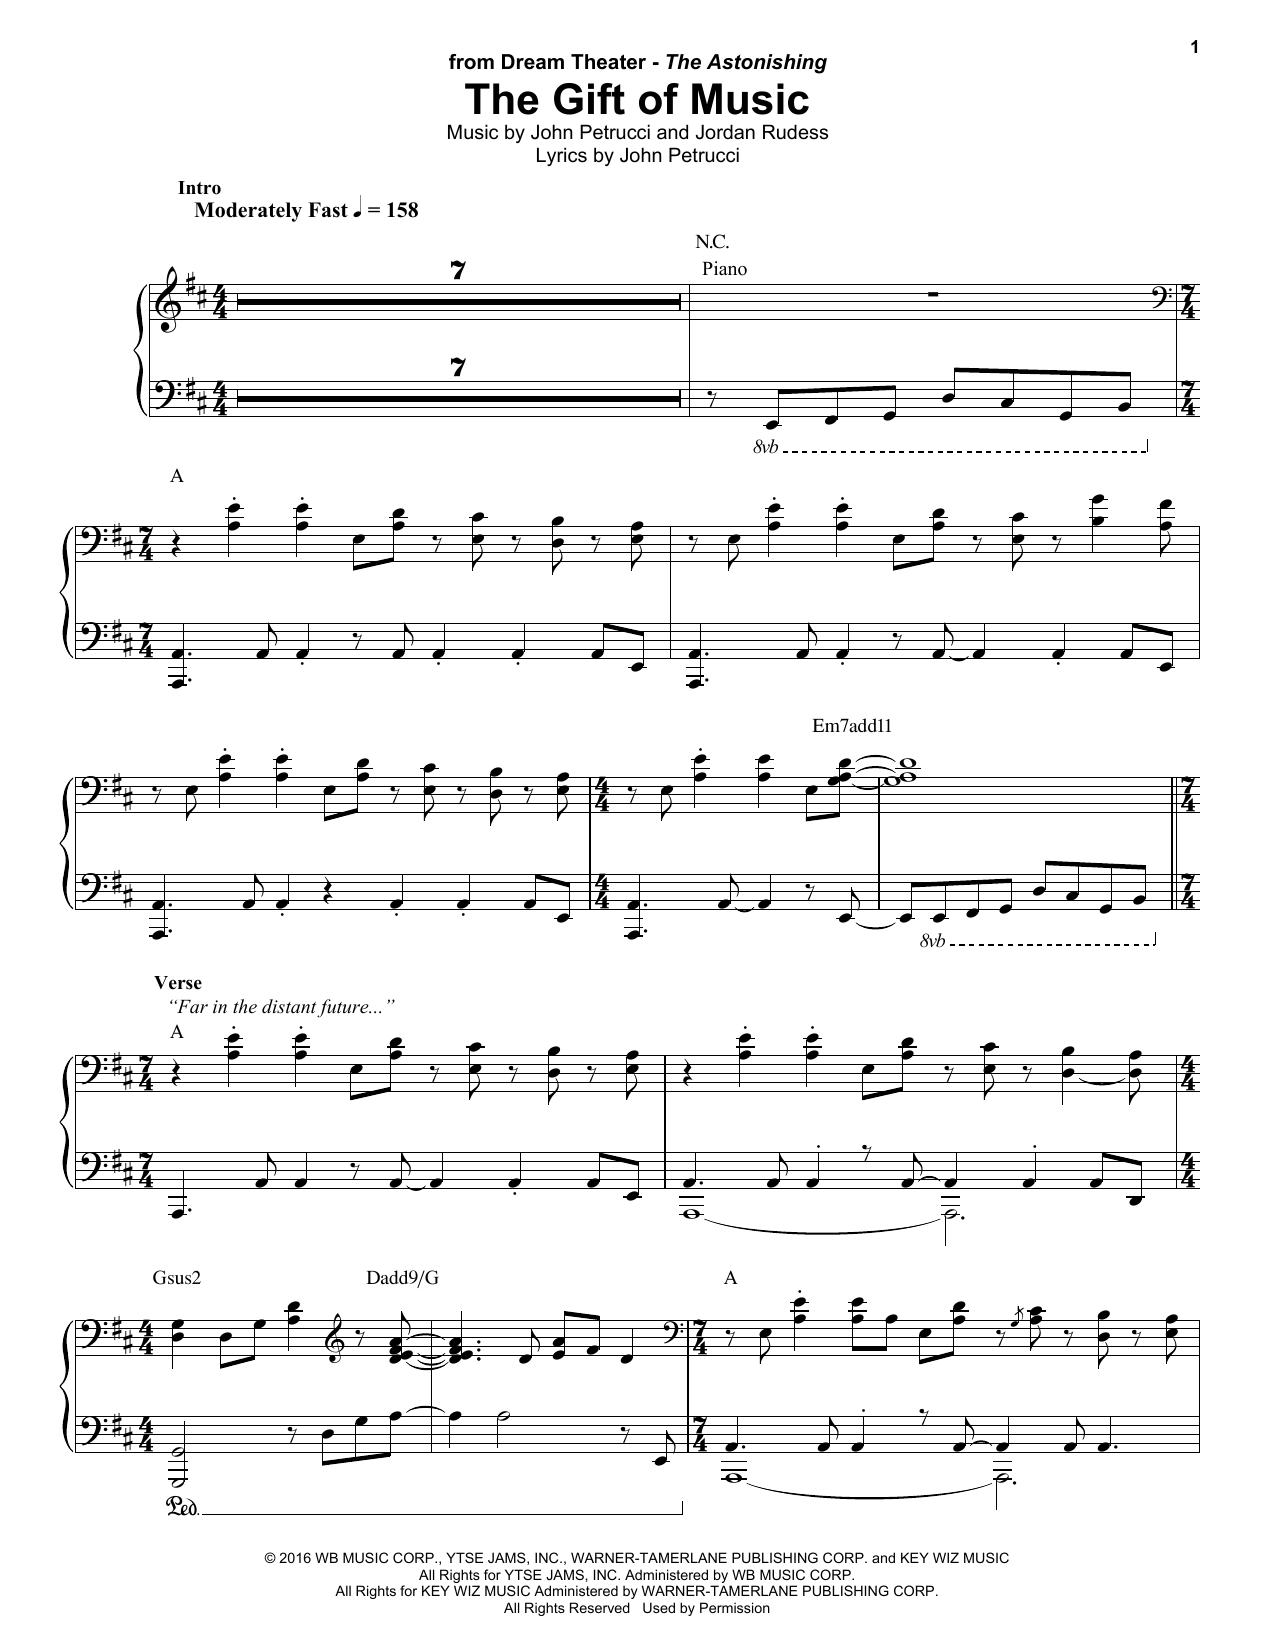 Dream Theater "The Gift Of Music" Sheet Music PDF Notes